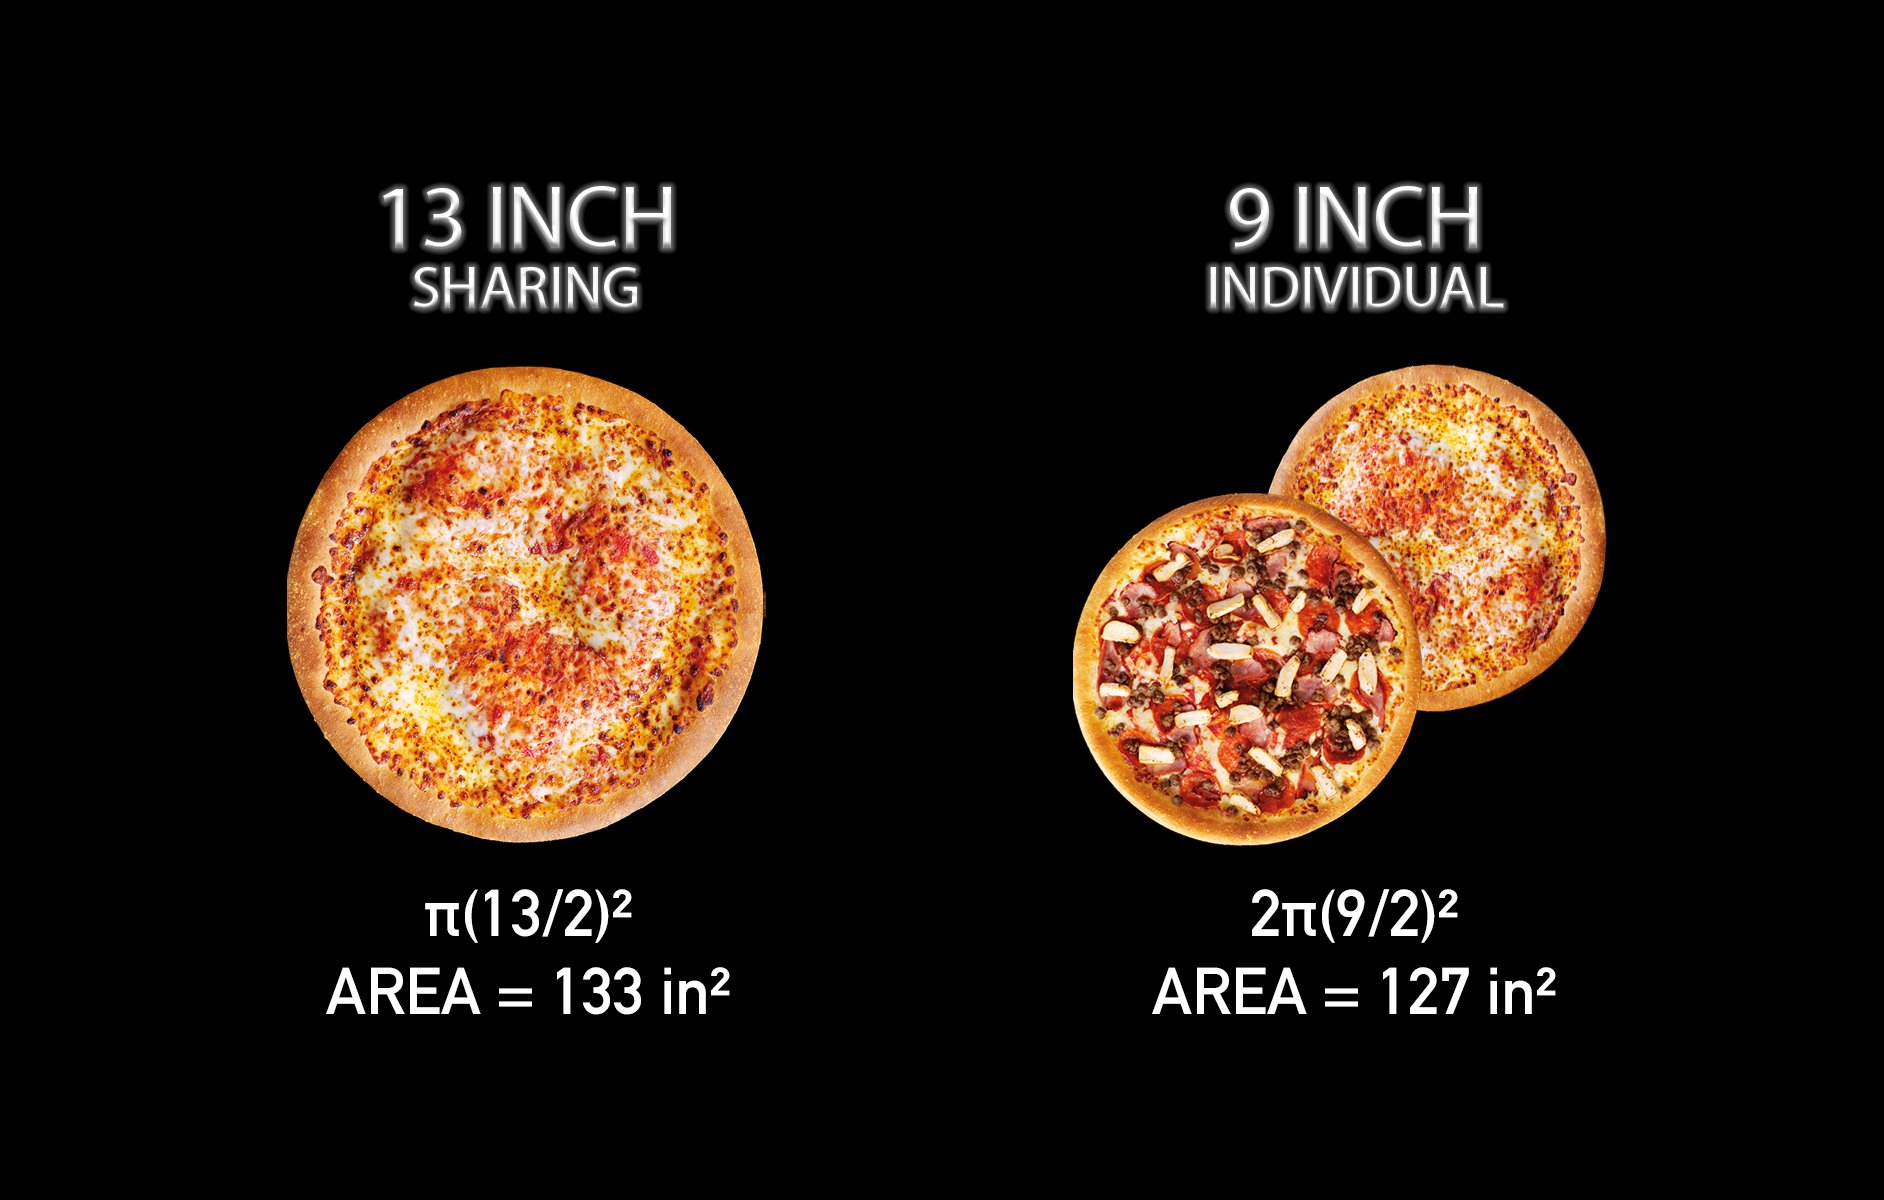 How Big Is A 9 Inch Pizza